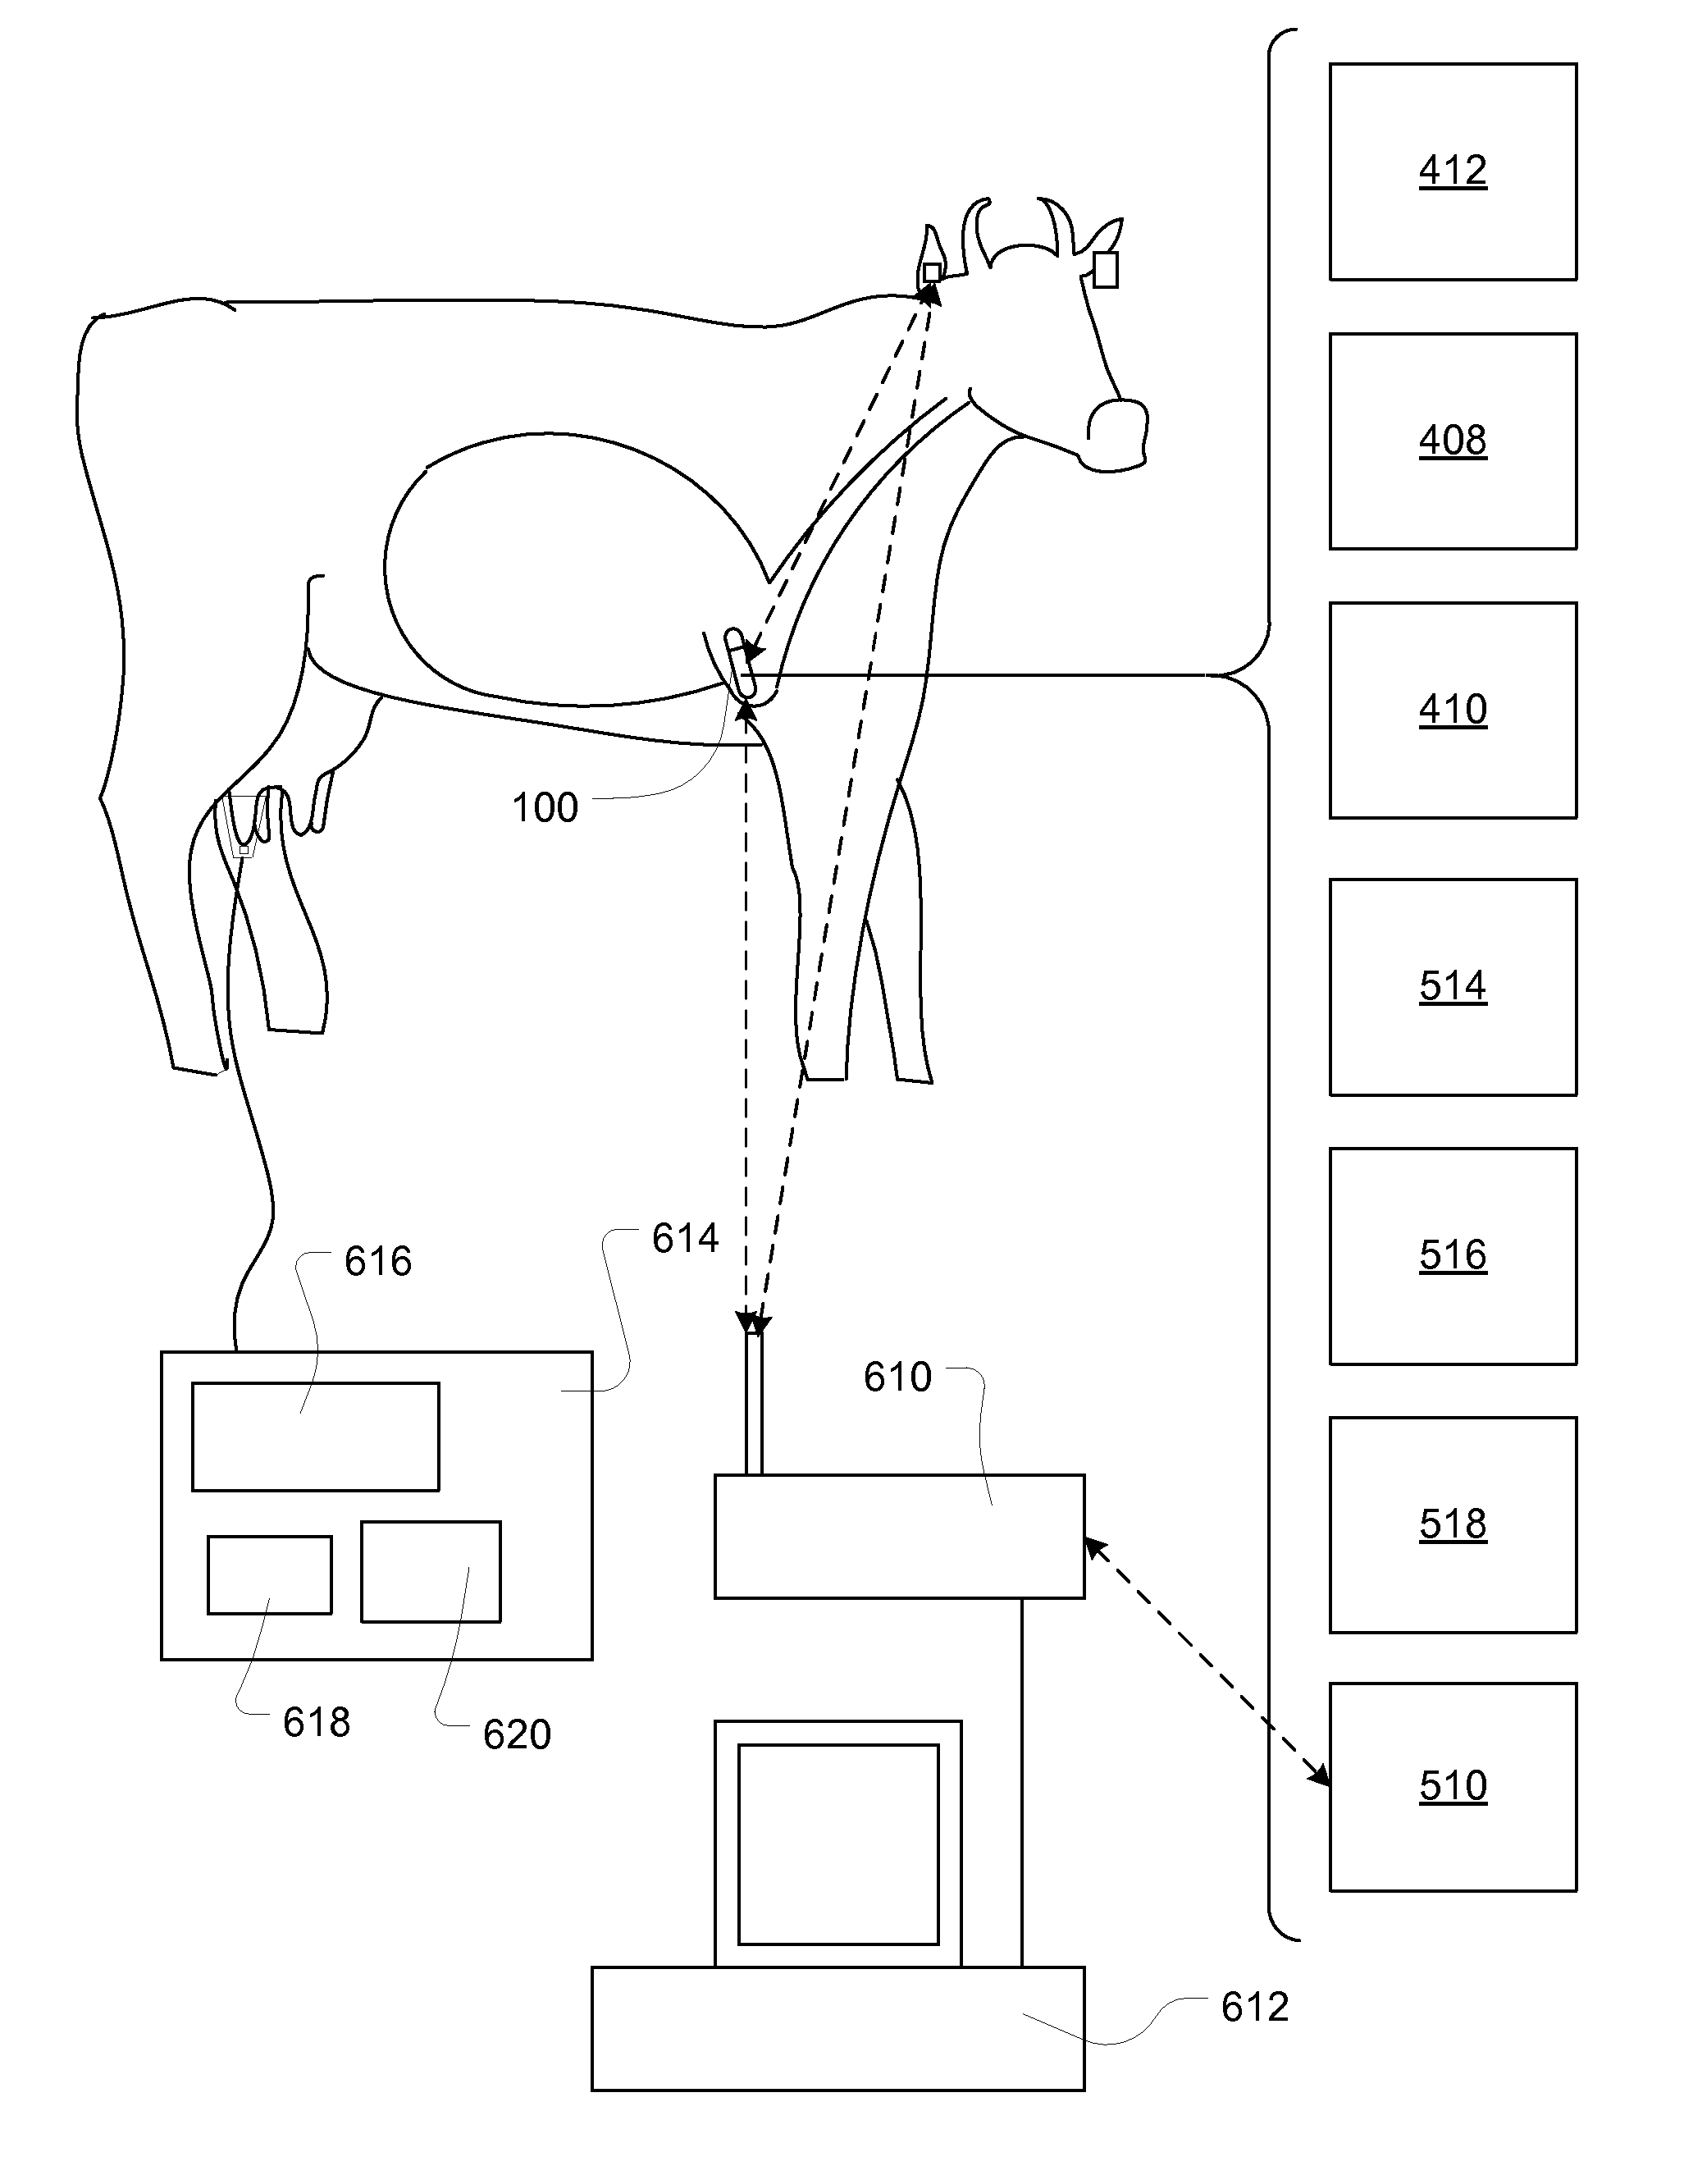 Apparatus, system, and method for animal monitor